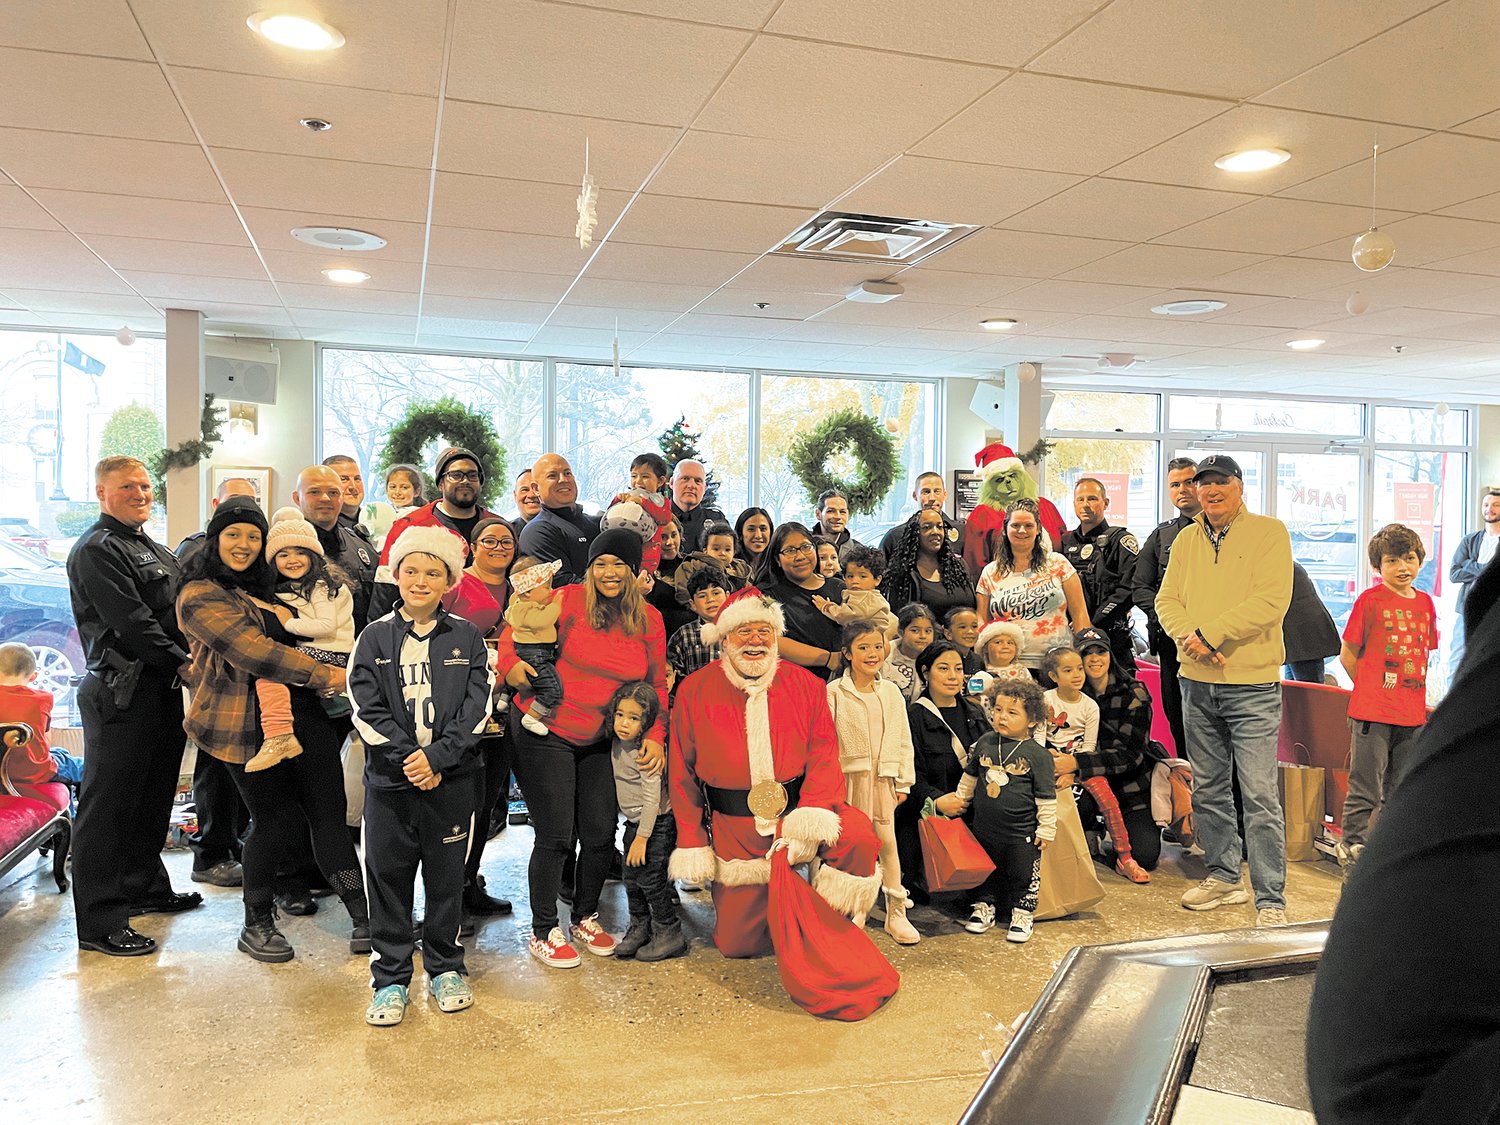 ALL TOGETHER: Santa, members of CPD and Cranston Cares, Mayor Hopkins, CCAP and the families who attended the holiday party all pose for a quick photo.